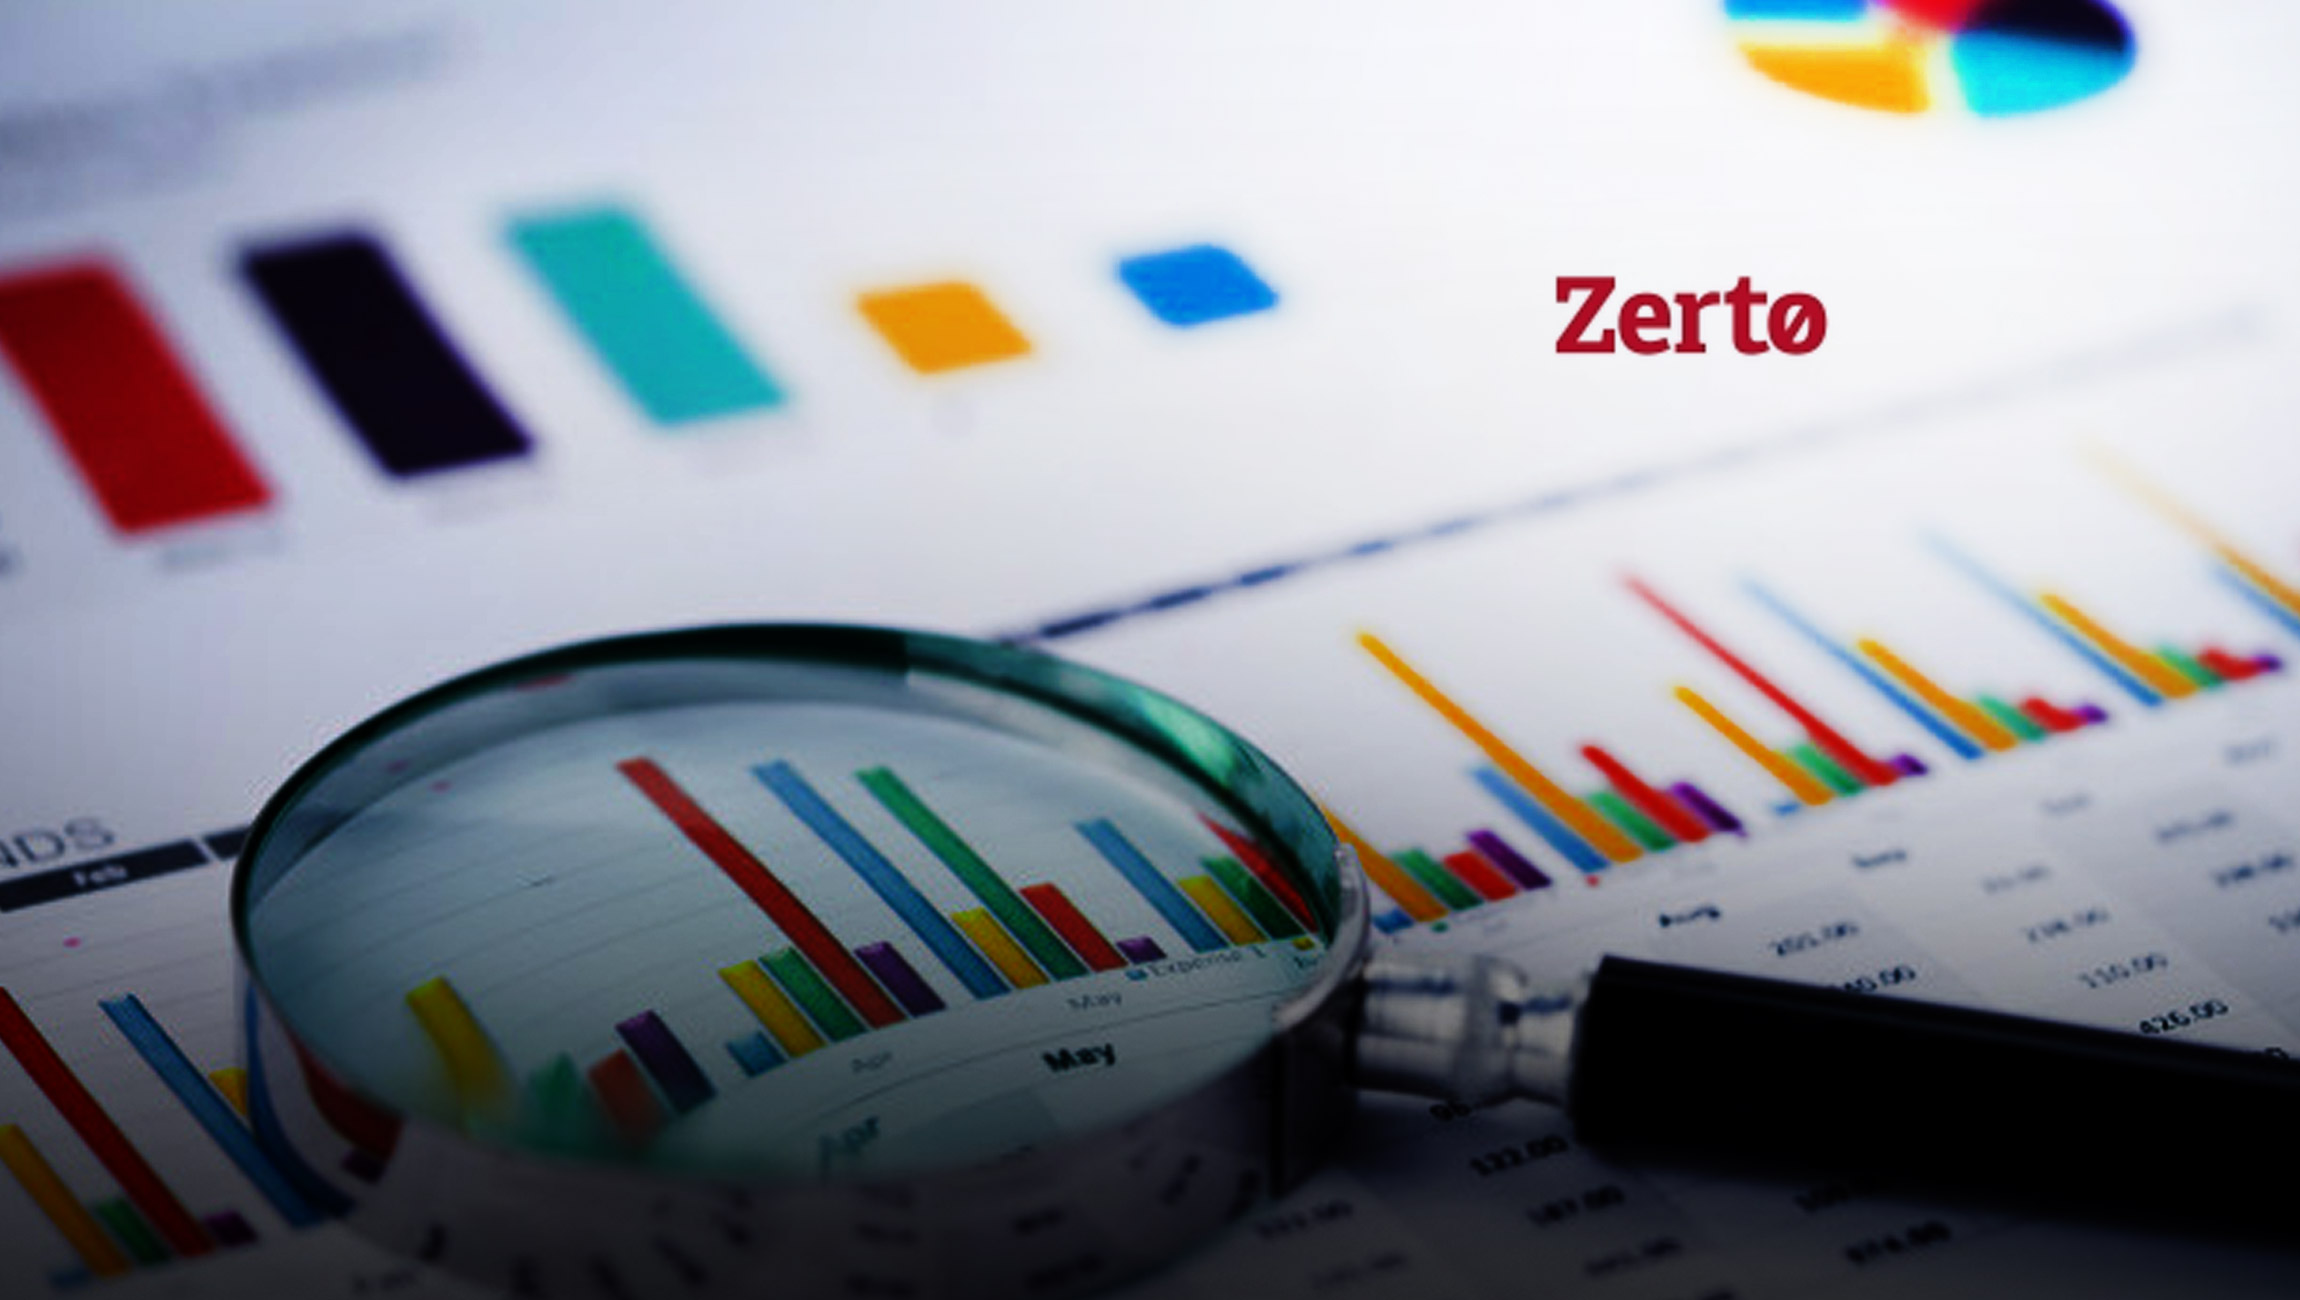 Zerto Enhances Alliance Partner Program to Deliver Accelerated Channel Growth